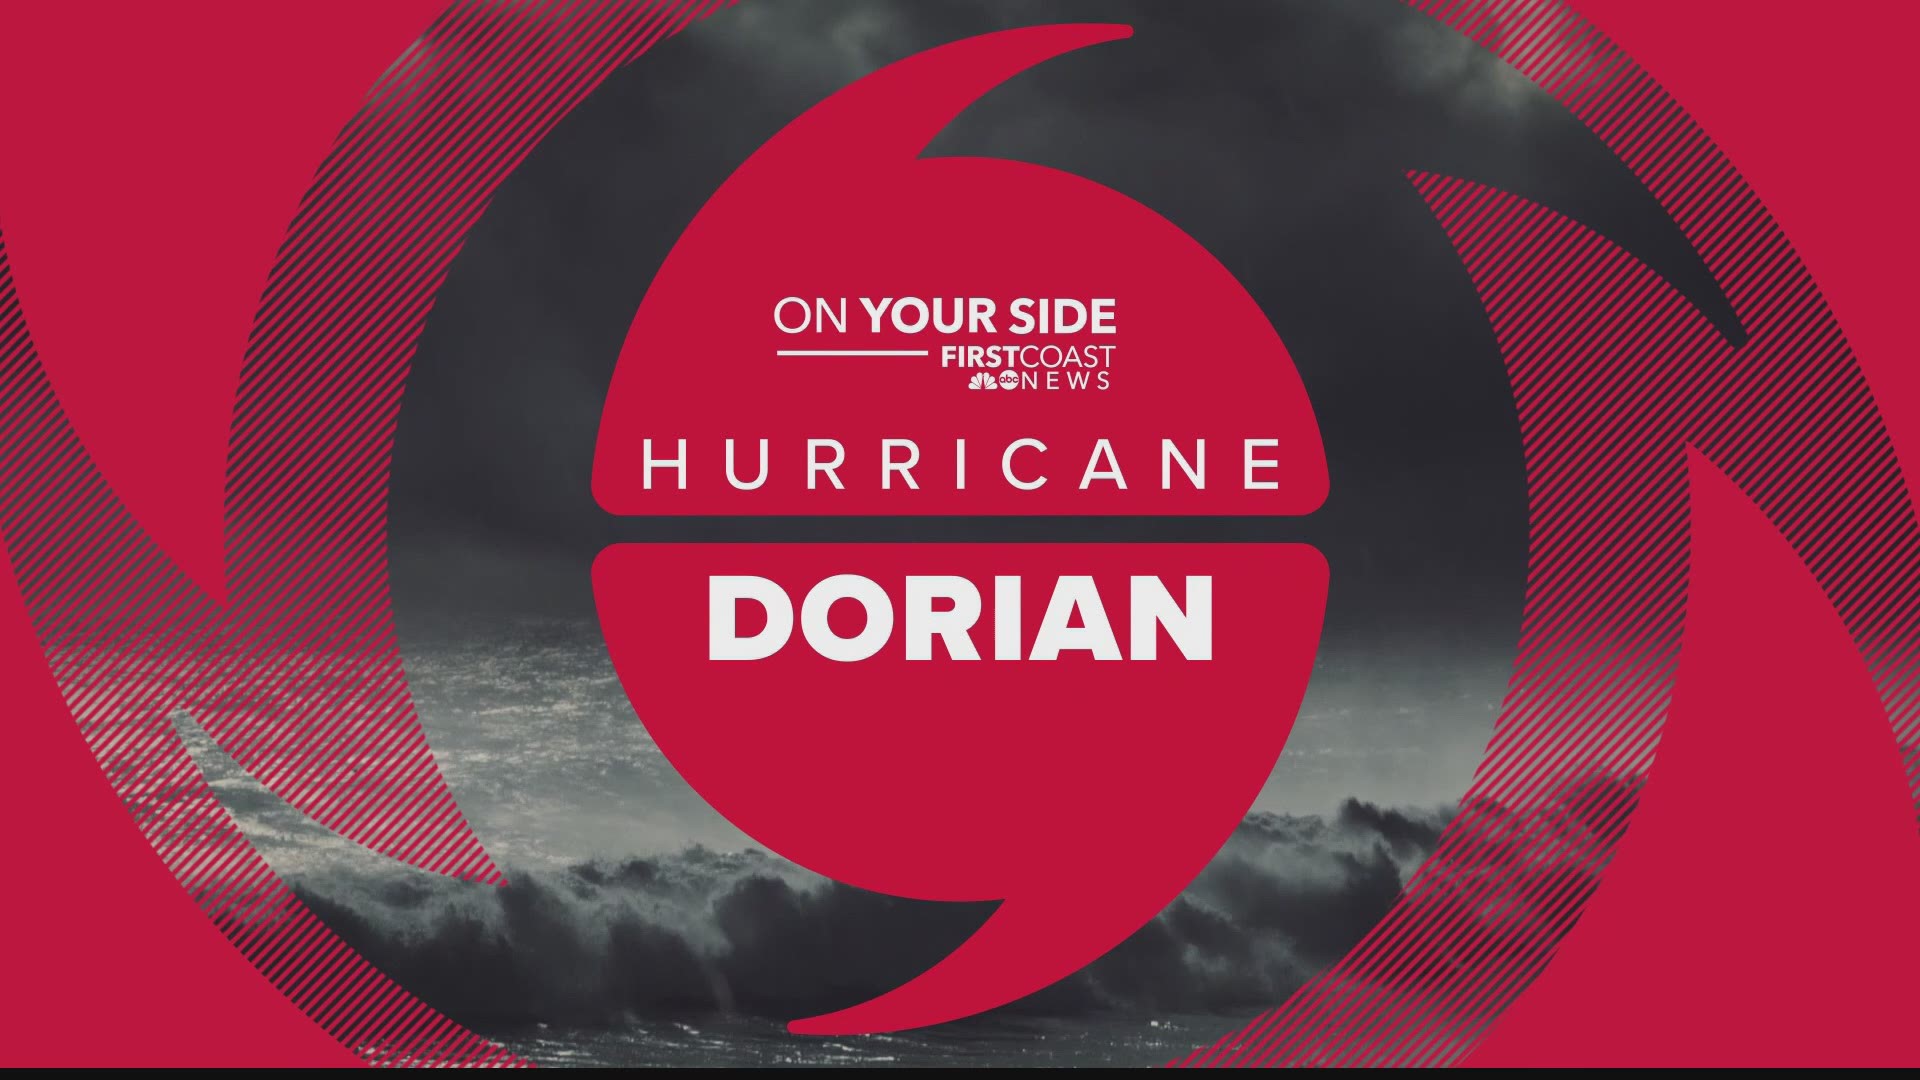 With the latest observations, Dorian is about 205 miles east of West Palm Beach, Dorian's minimum central pressure is 913 mb. It continues moving to the west at 7 mph, impacting the Bahamas today with life-threatening storm surge and devastating winds. The storm is expected to take one more significant turn, to the north, as it approac